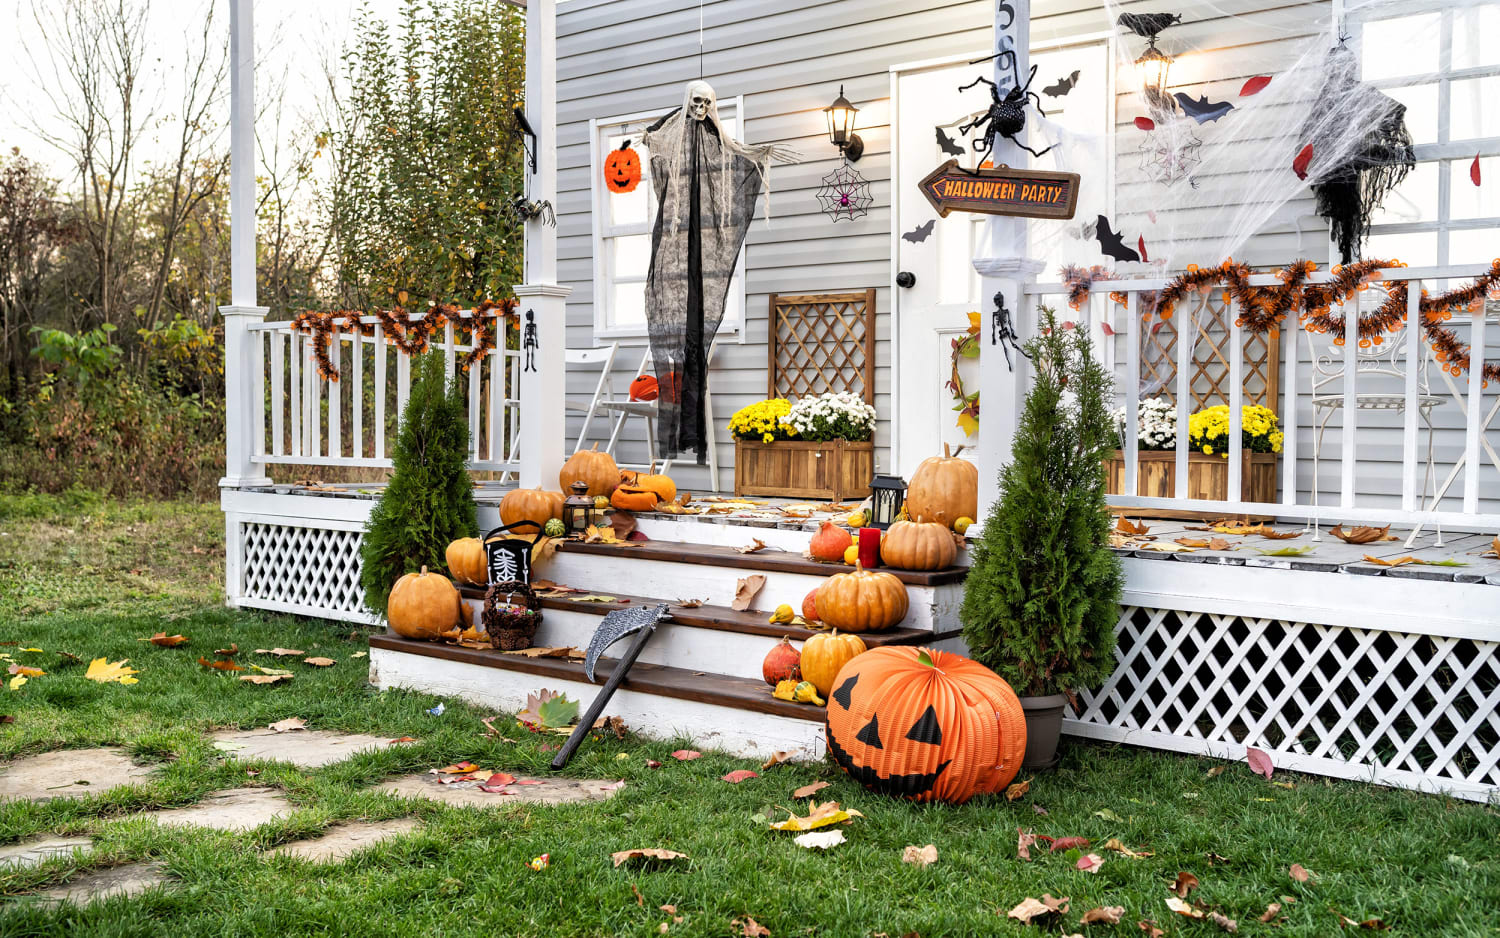 20 Best Halloween Activities and Traditions (Kids & Adults) - Parade